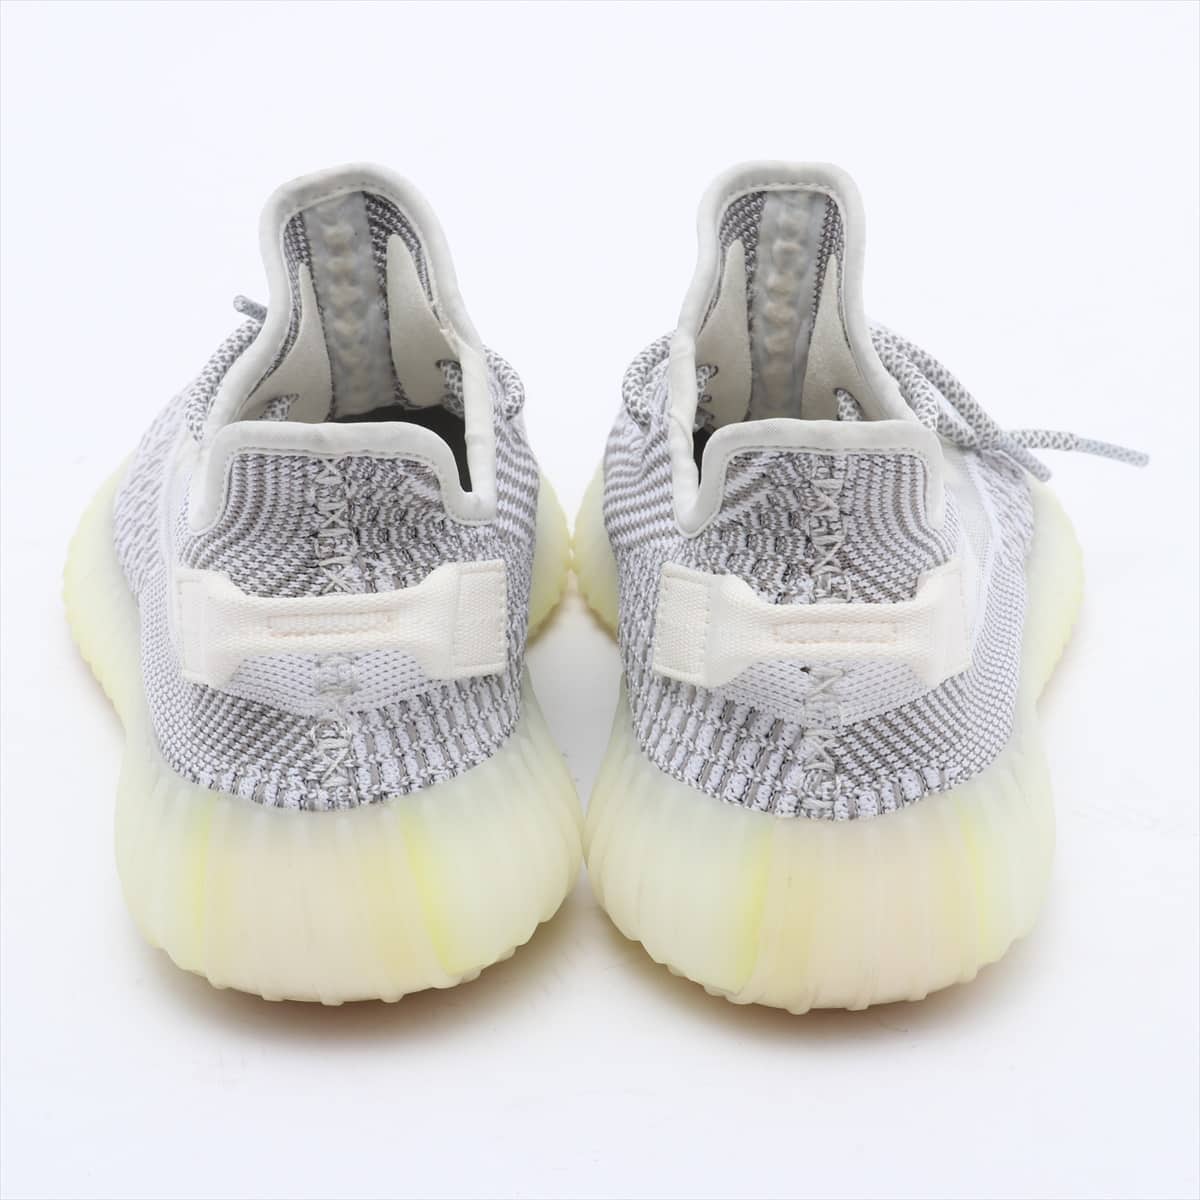 Adidas Knit Sneakers 26.5 Men's Grey Easy Boost V2 350 EF2905